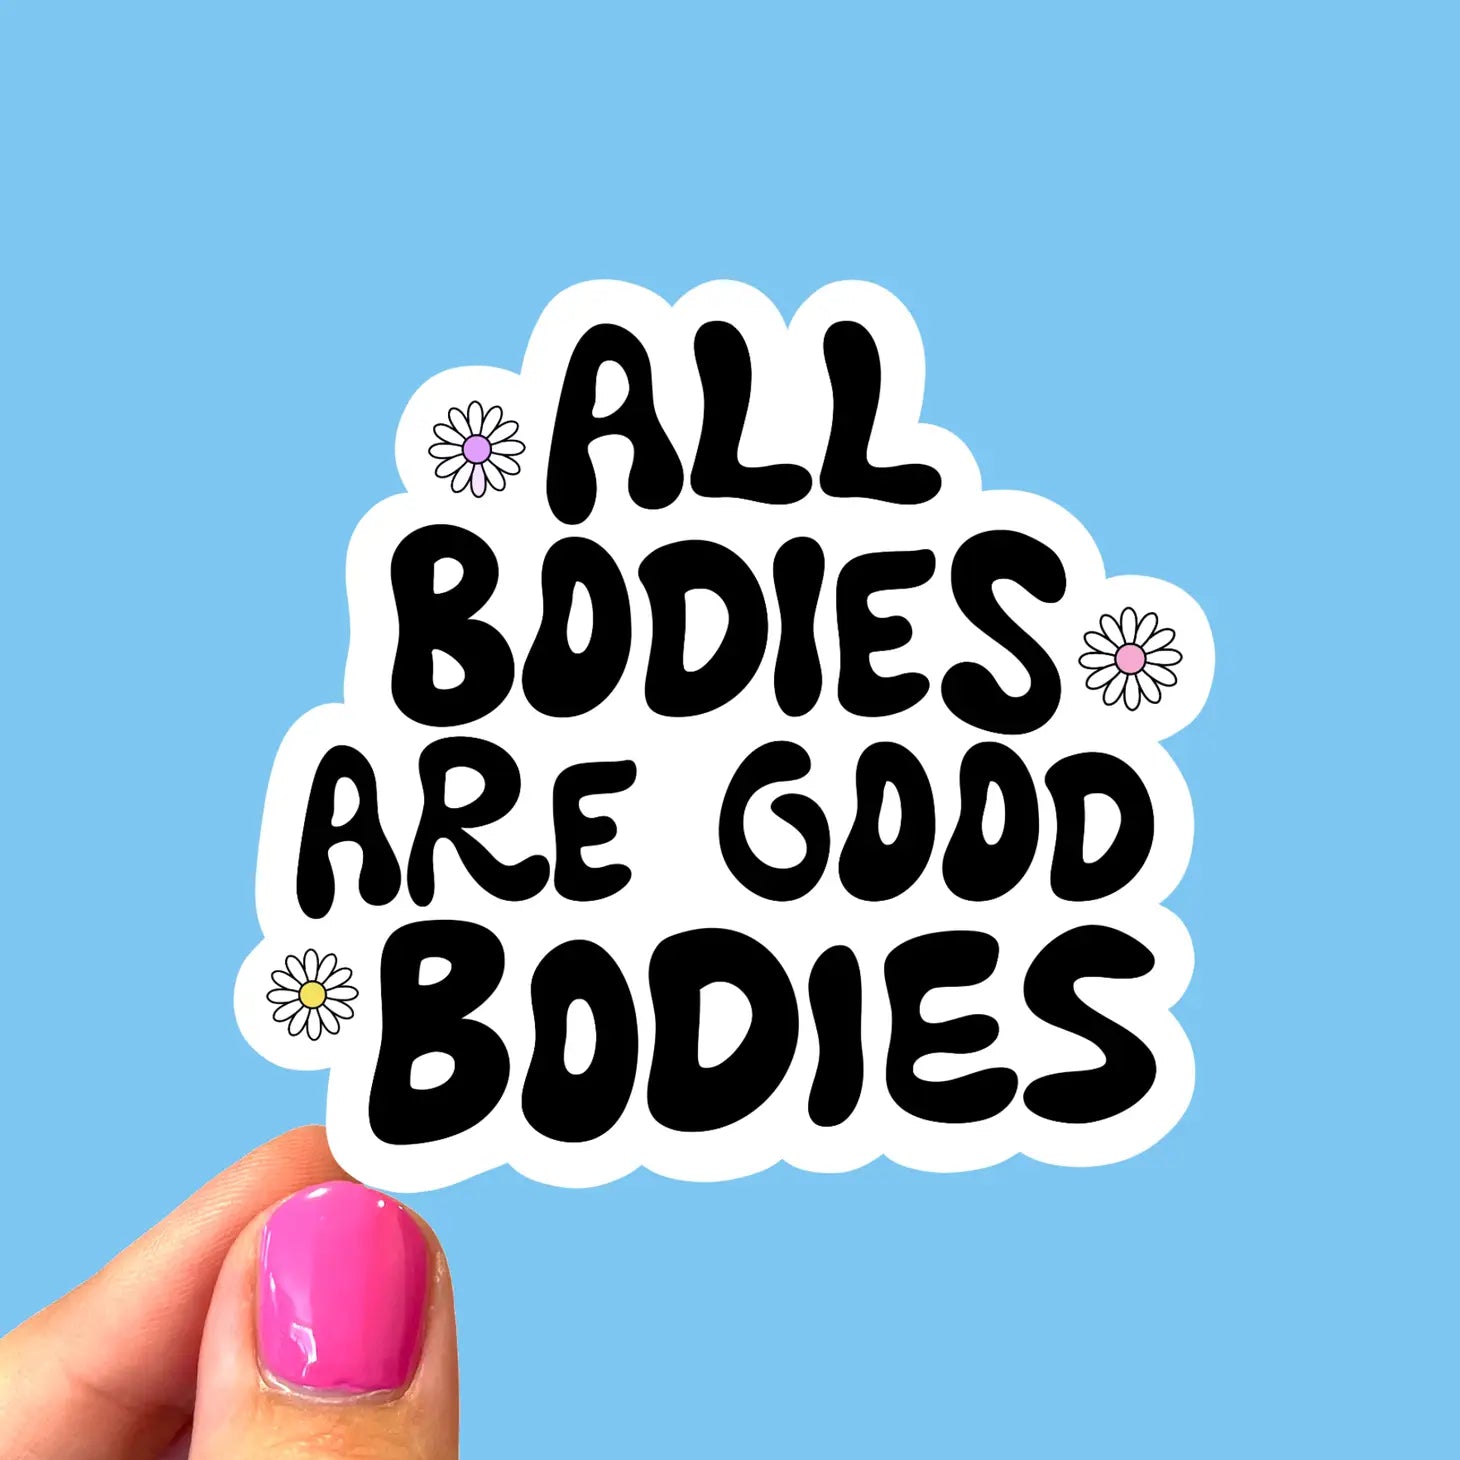 Body Positivity Sticker, All Bodies Are Good Bodies